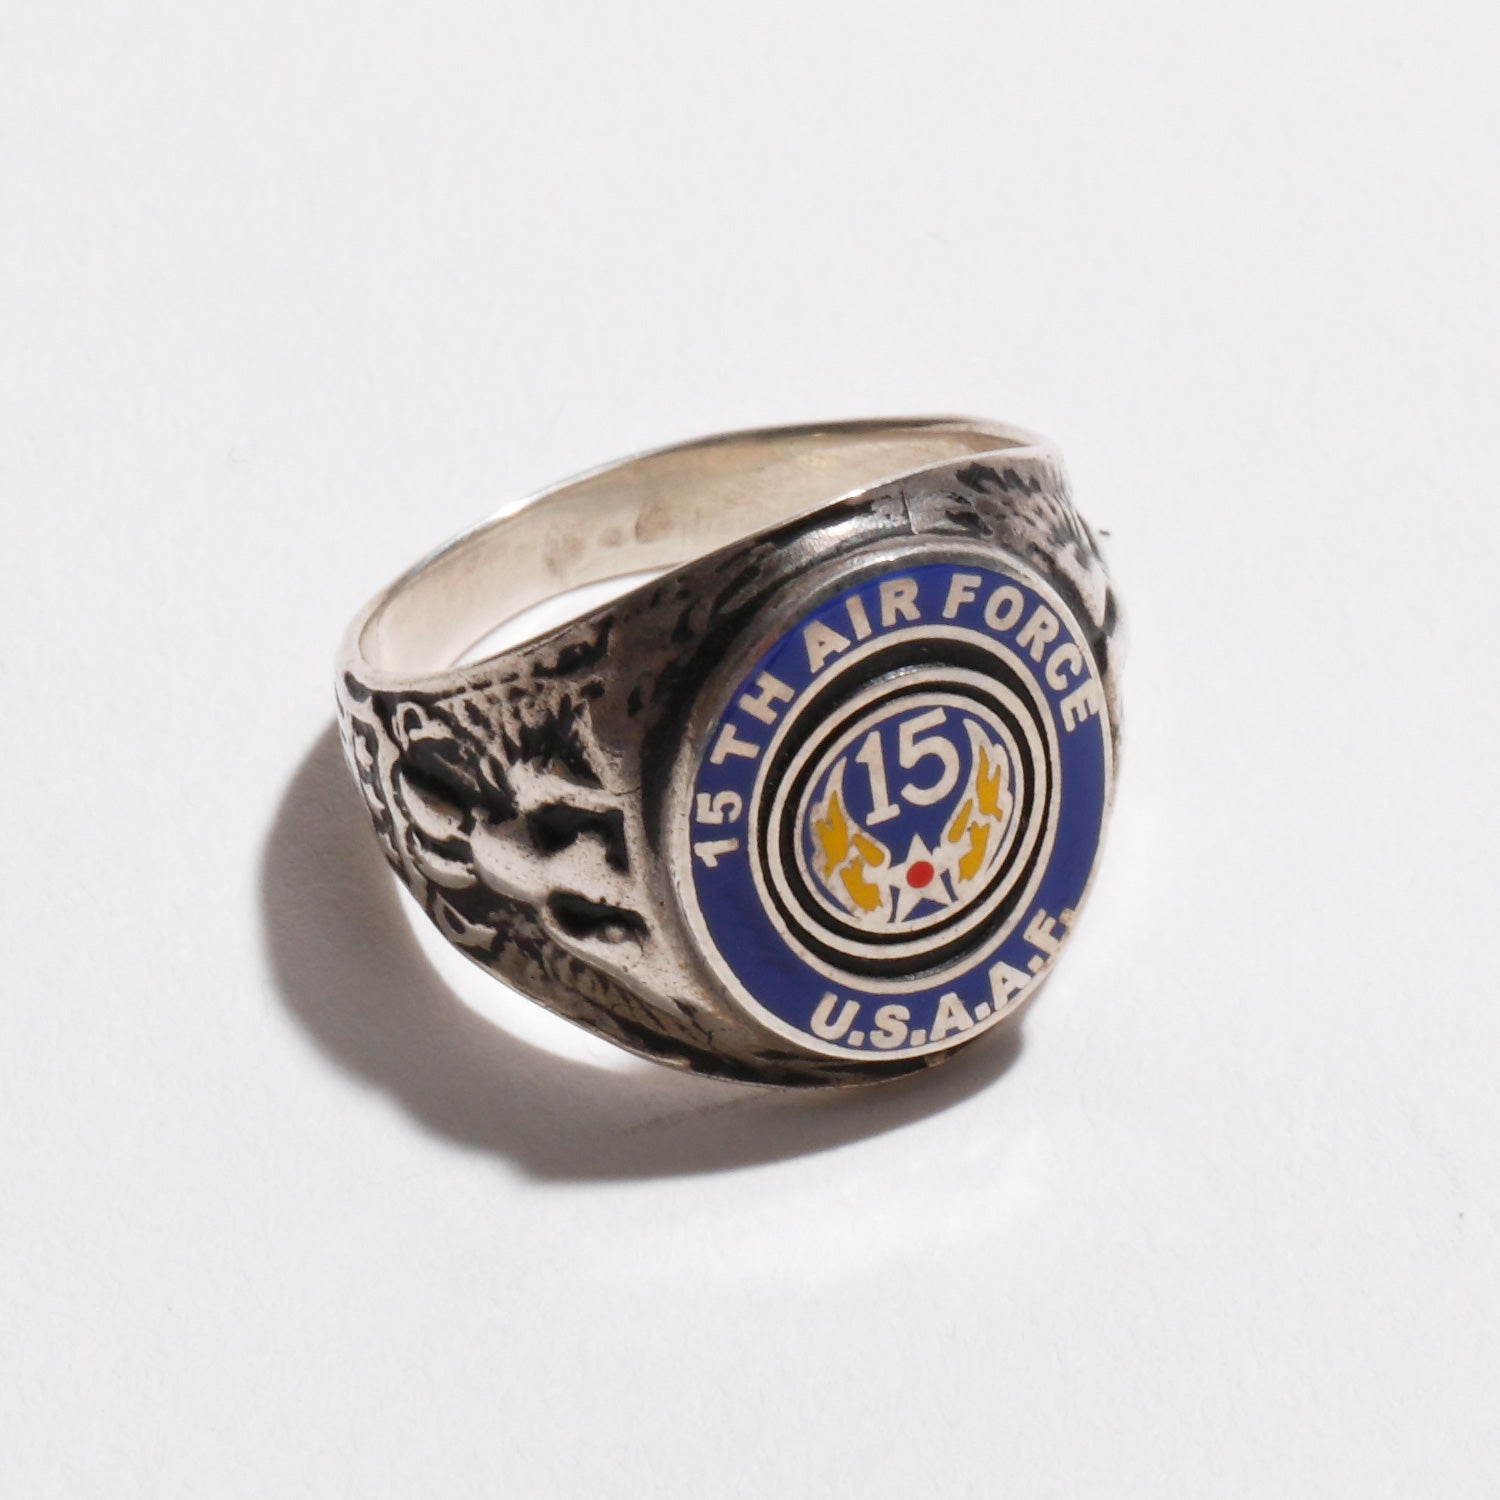 15TH AIR FORCE RING